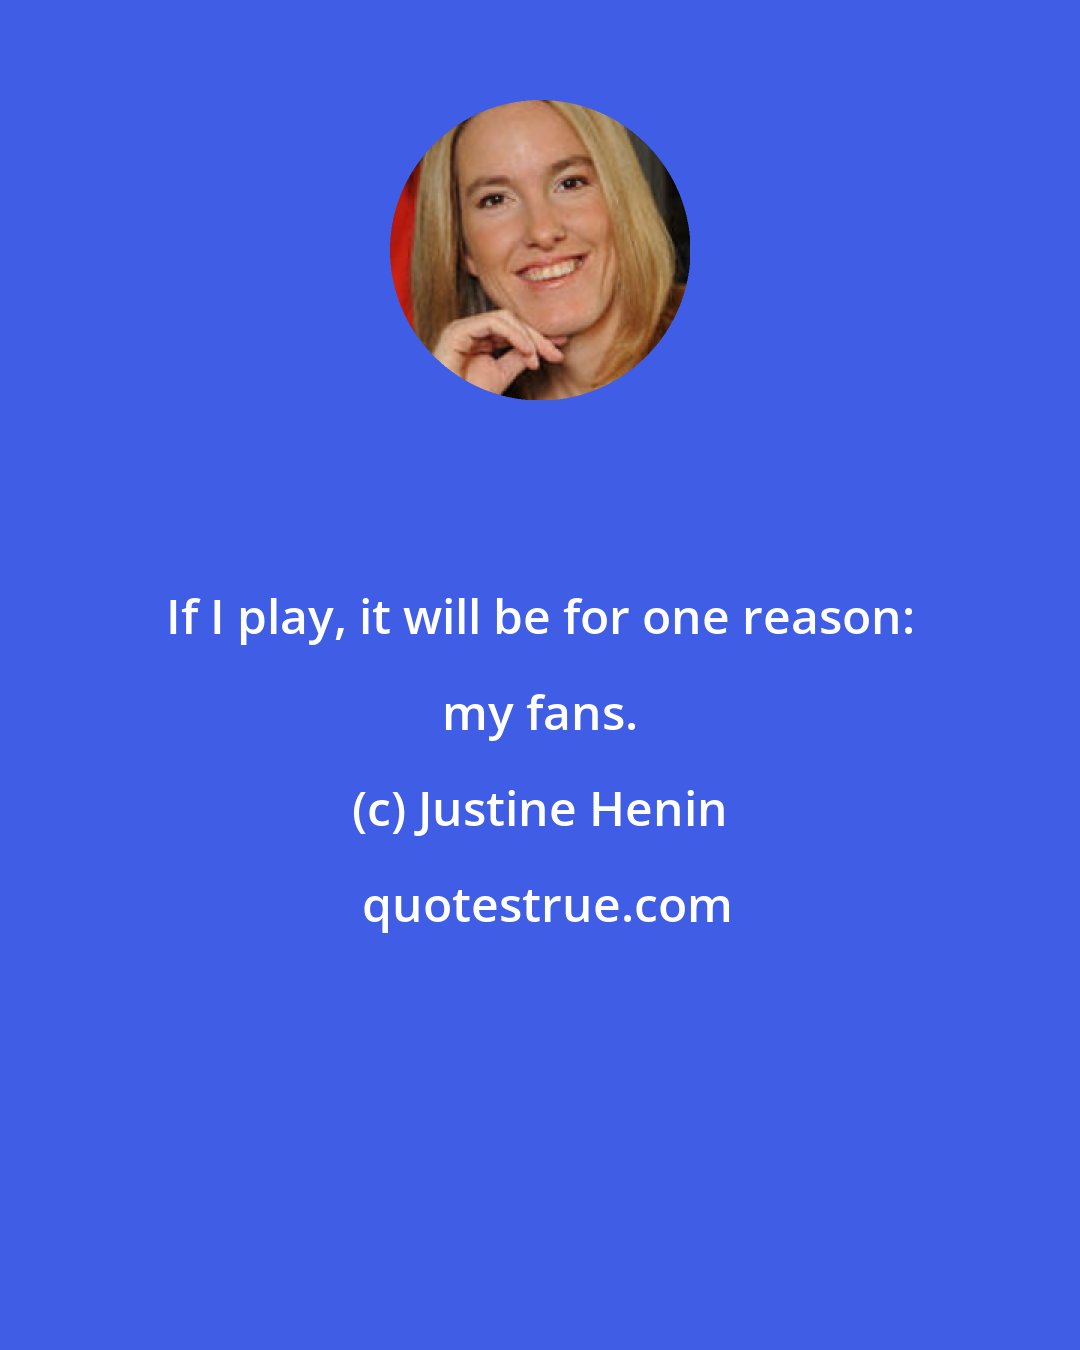 Justine Henin: If I play, it will be for one reason: my fans.